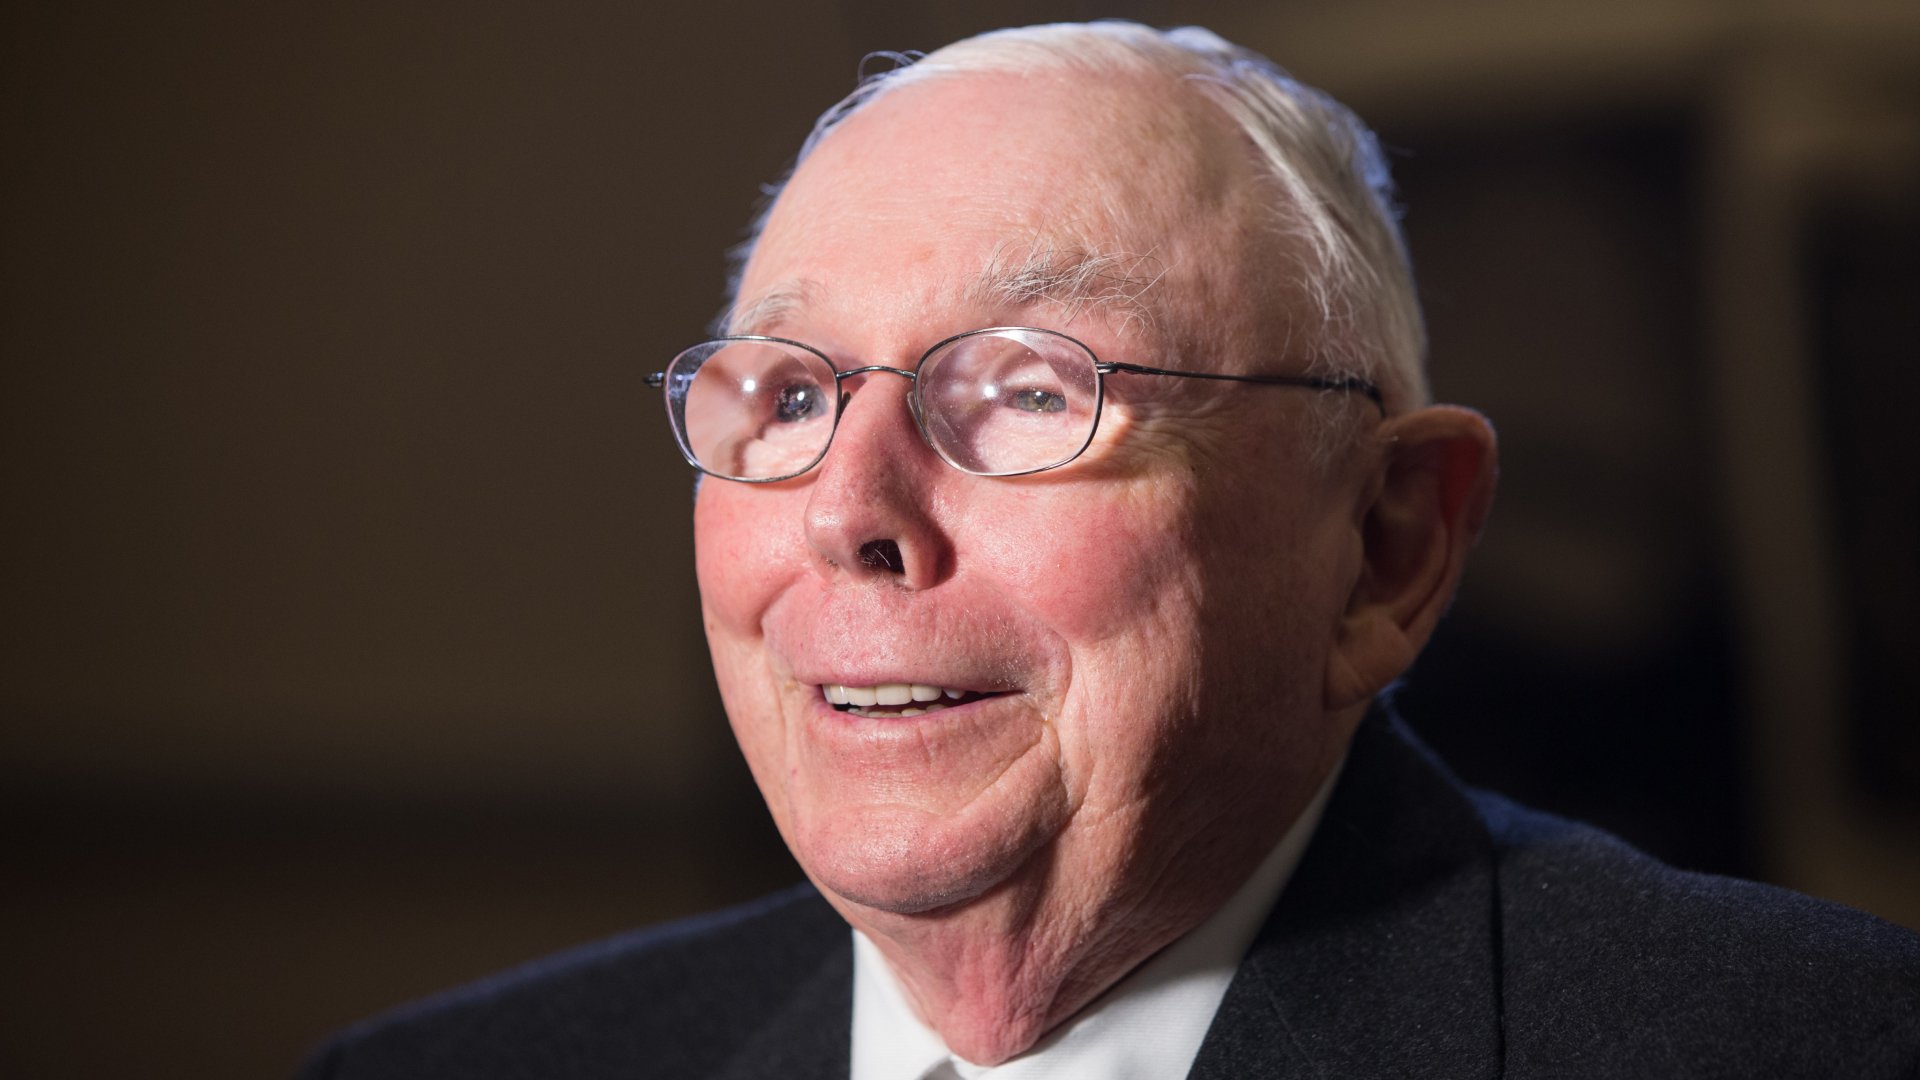 Charlie Munger Reckons It’s “Just Ridiculous” to Buy Crypto